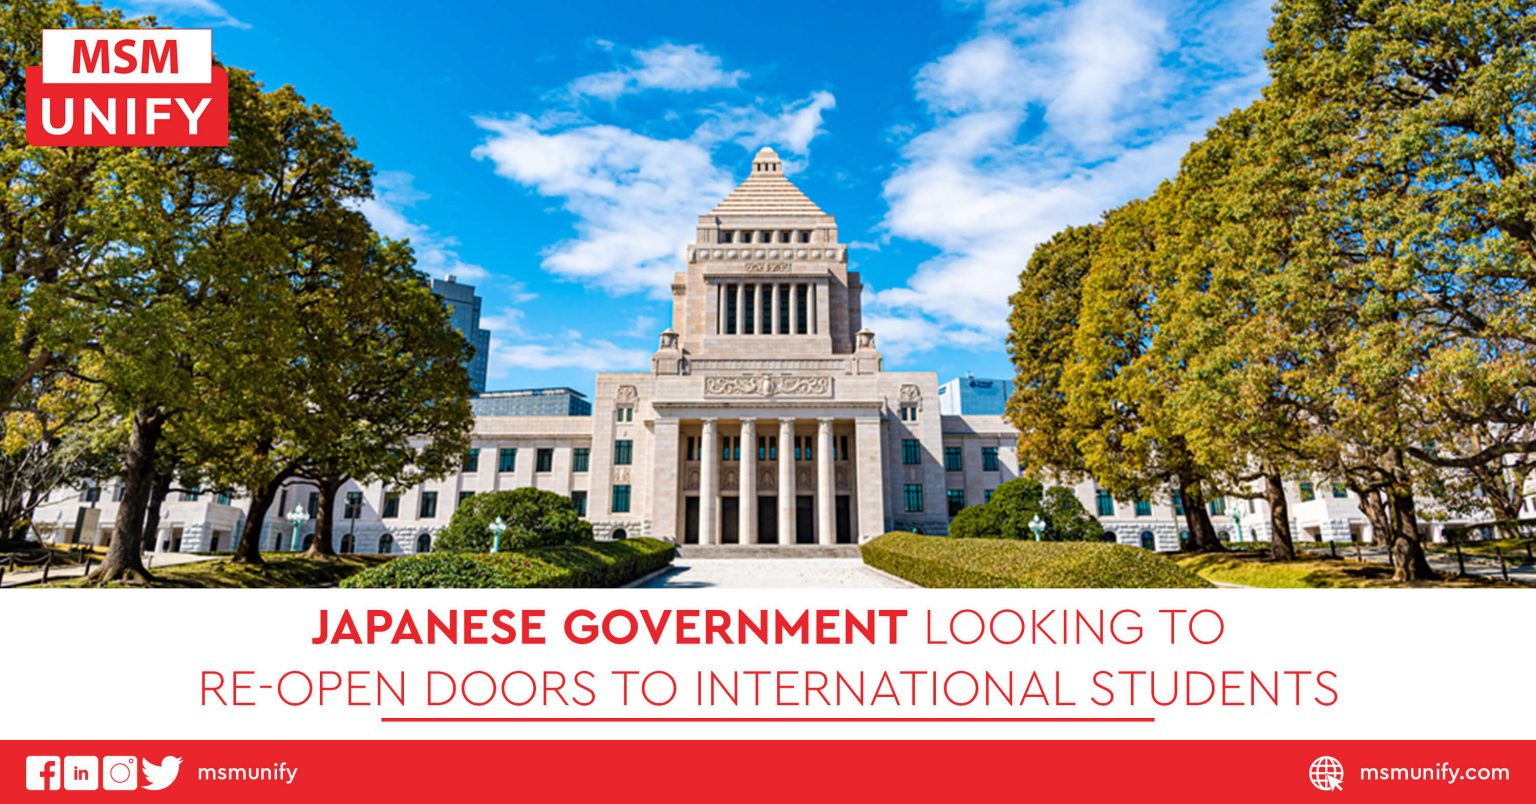 Japanese Government Looking To Reopen Doors to International Students